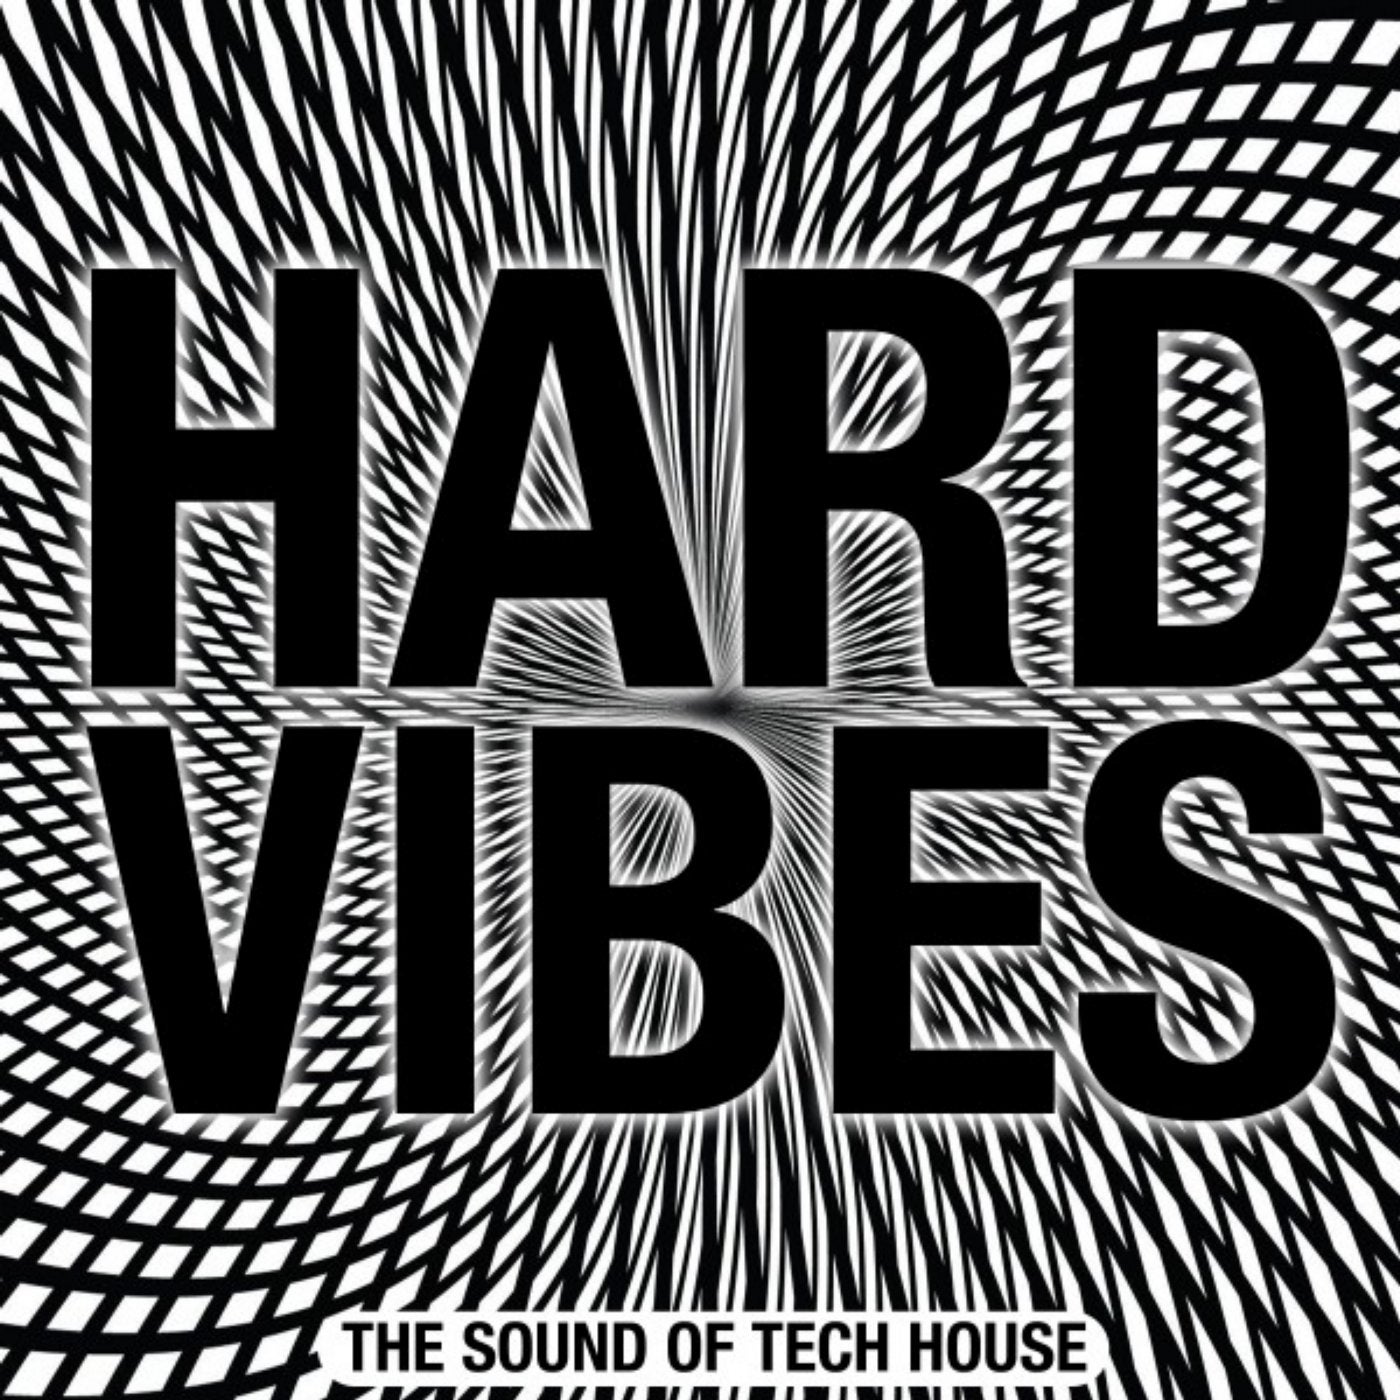 Hard Vibes (Tech House Solution)